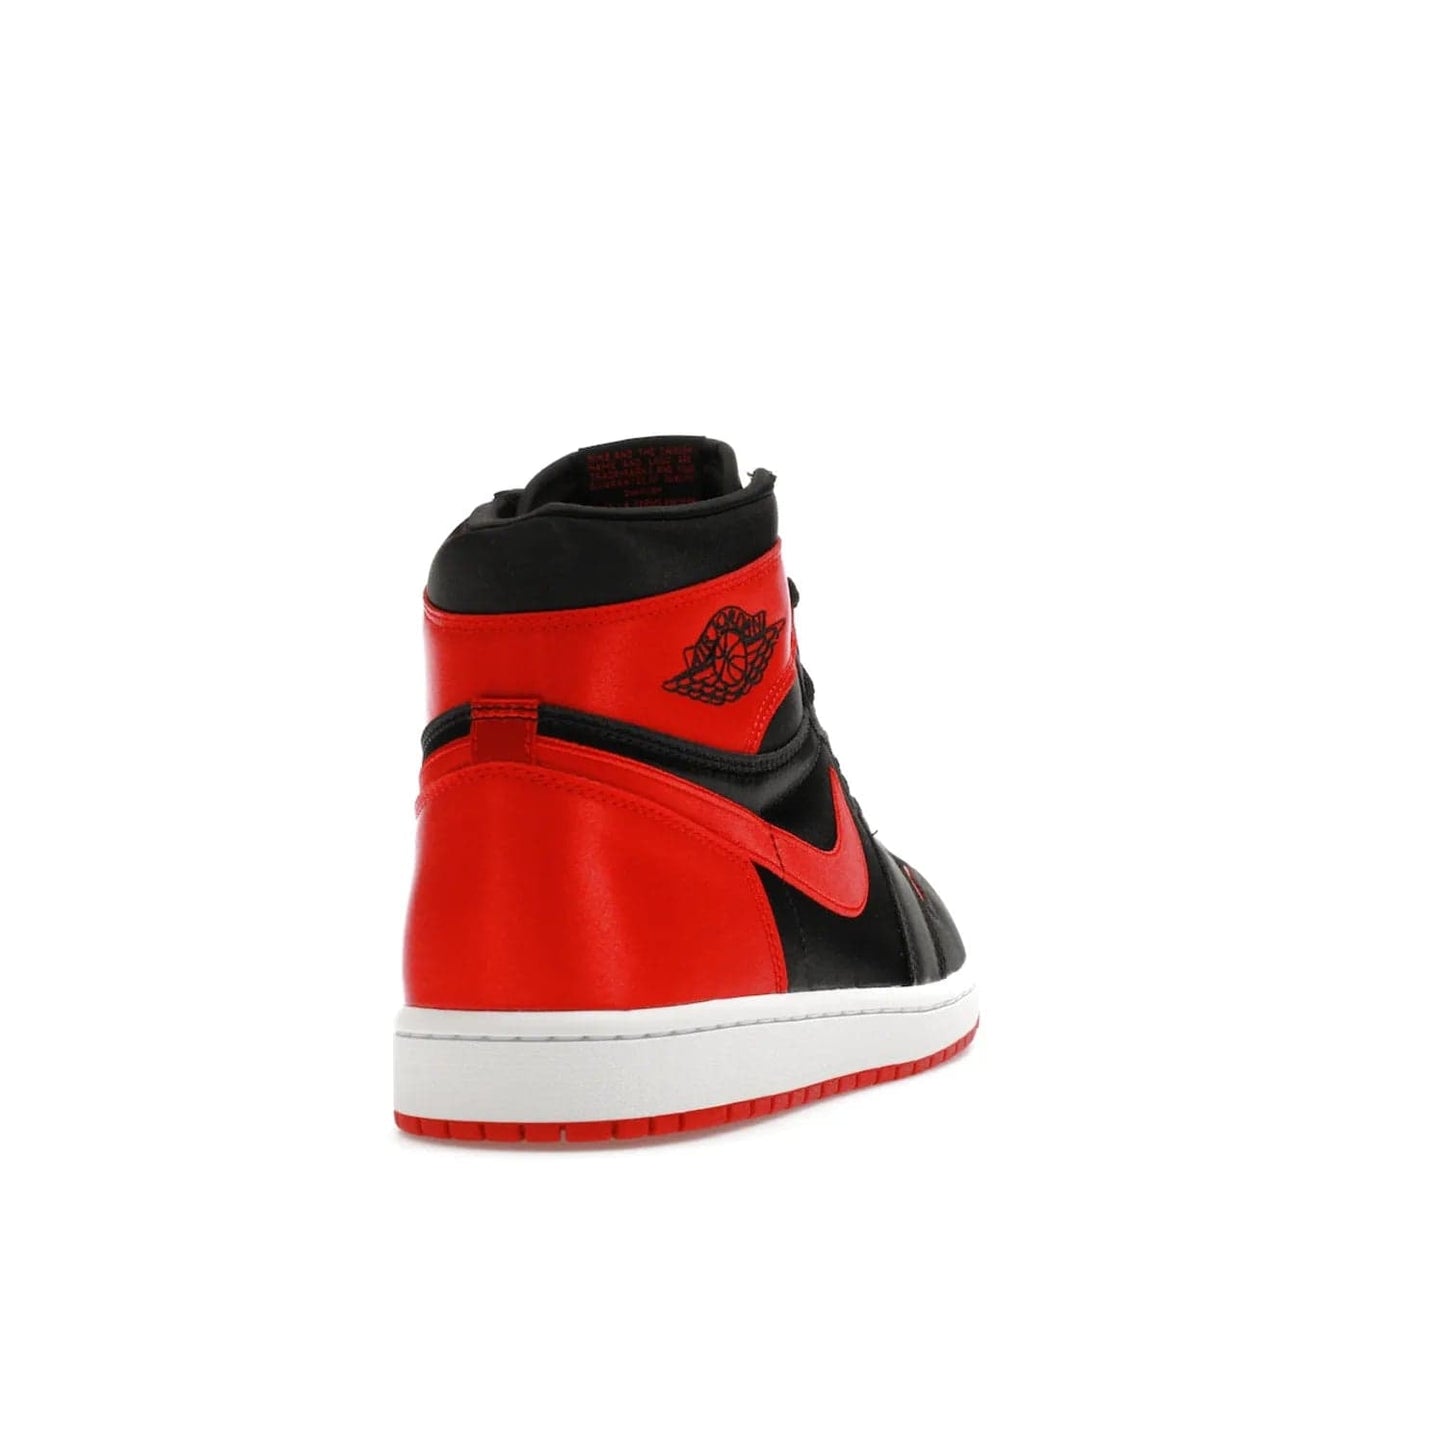 Jordan 1 Retro High OG Satin Bred (Women's) - Image 30 - Only at www.BallersClubKickz.com - Introducing the Jordan 1 Retro High OG Satin Bred (Women's). Luxe satin finish, contrasting hues & classic accents. Trending sneakers symbolizing timelessness & heritage. Make a bold statement with this iconic shoe. Available October 4, 2023.